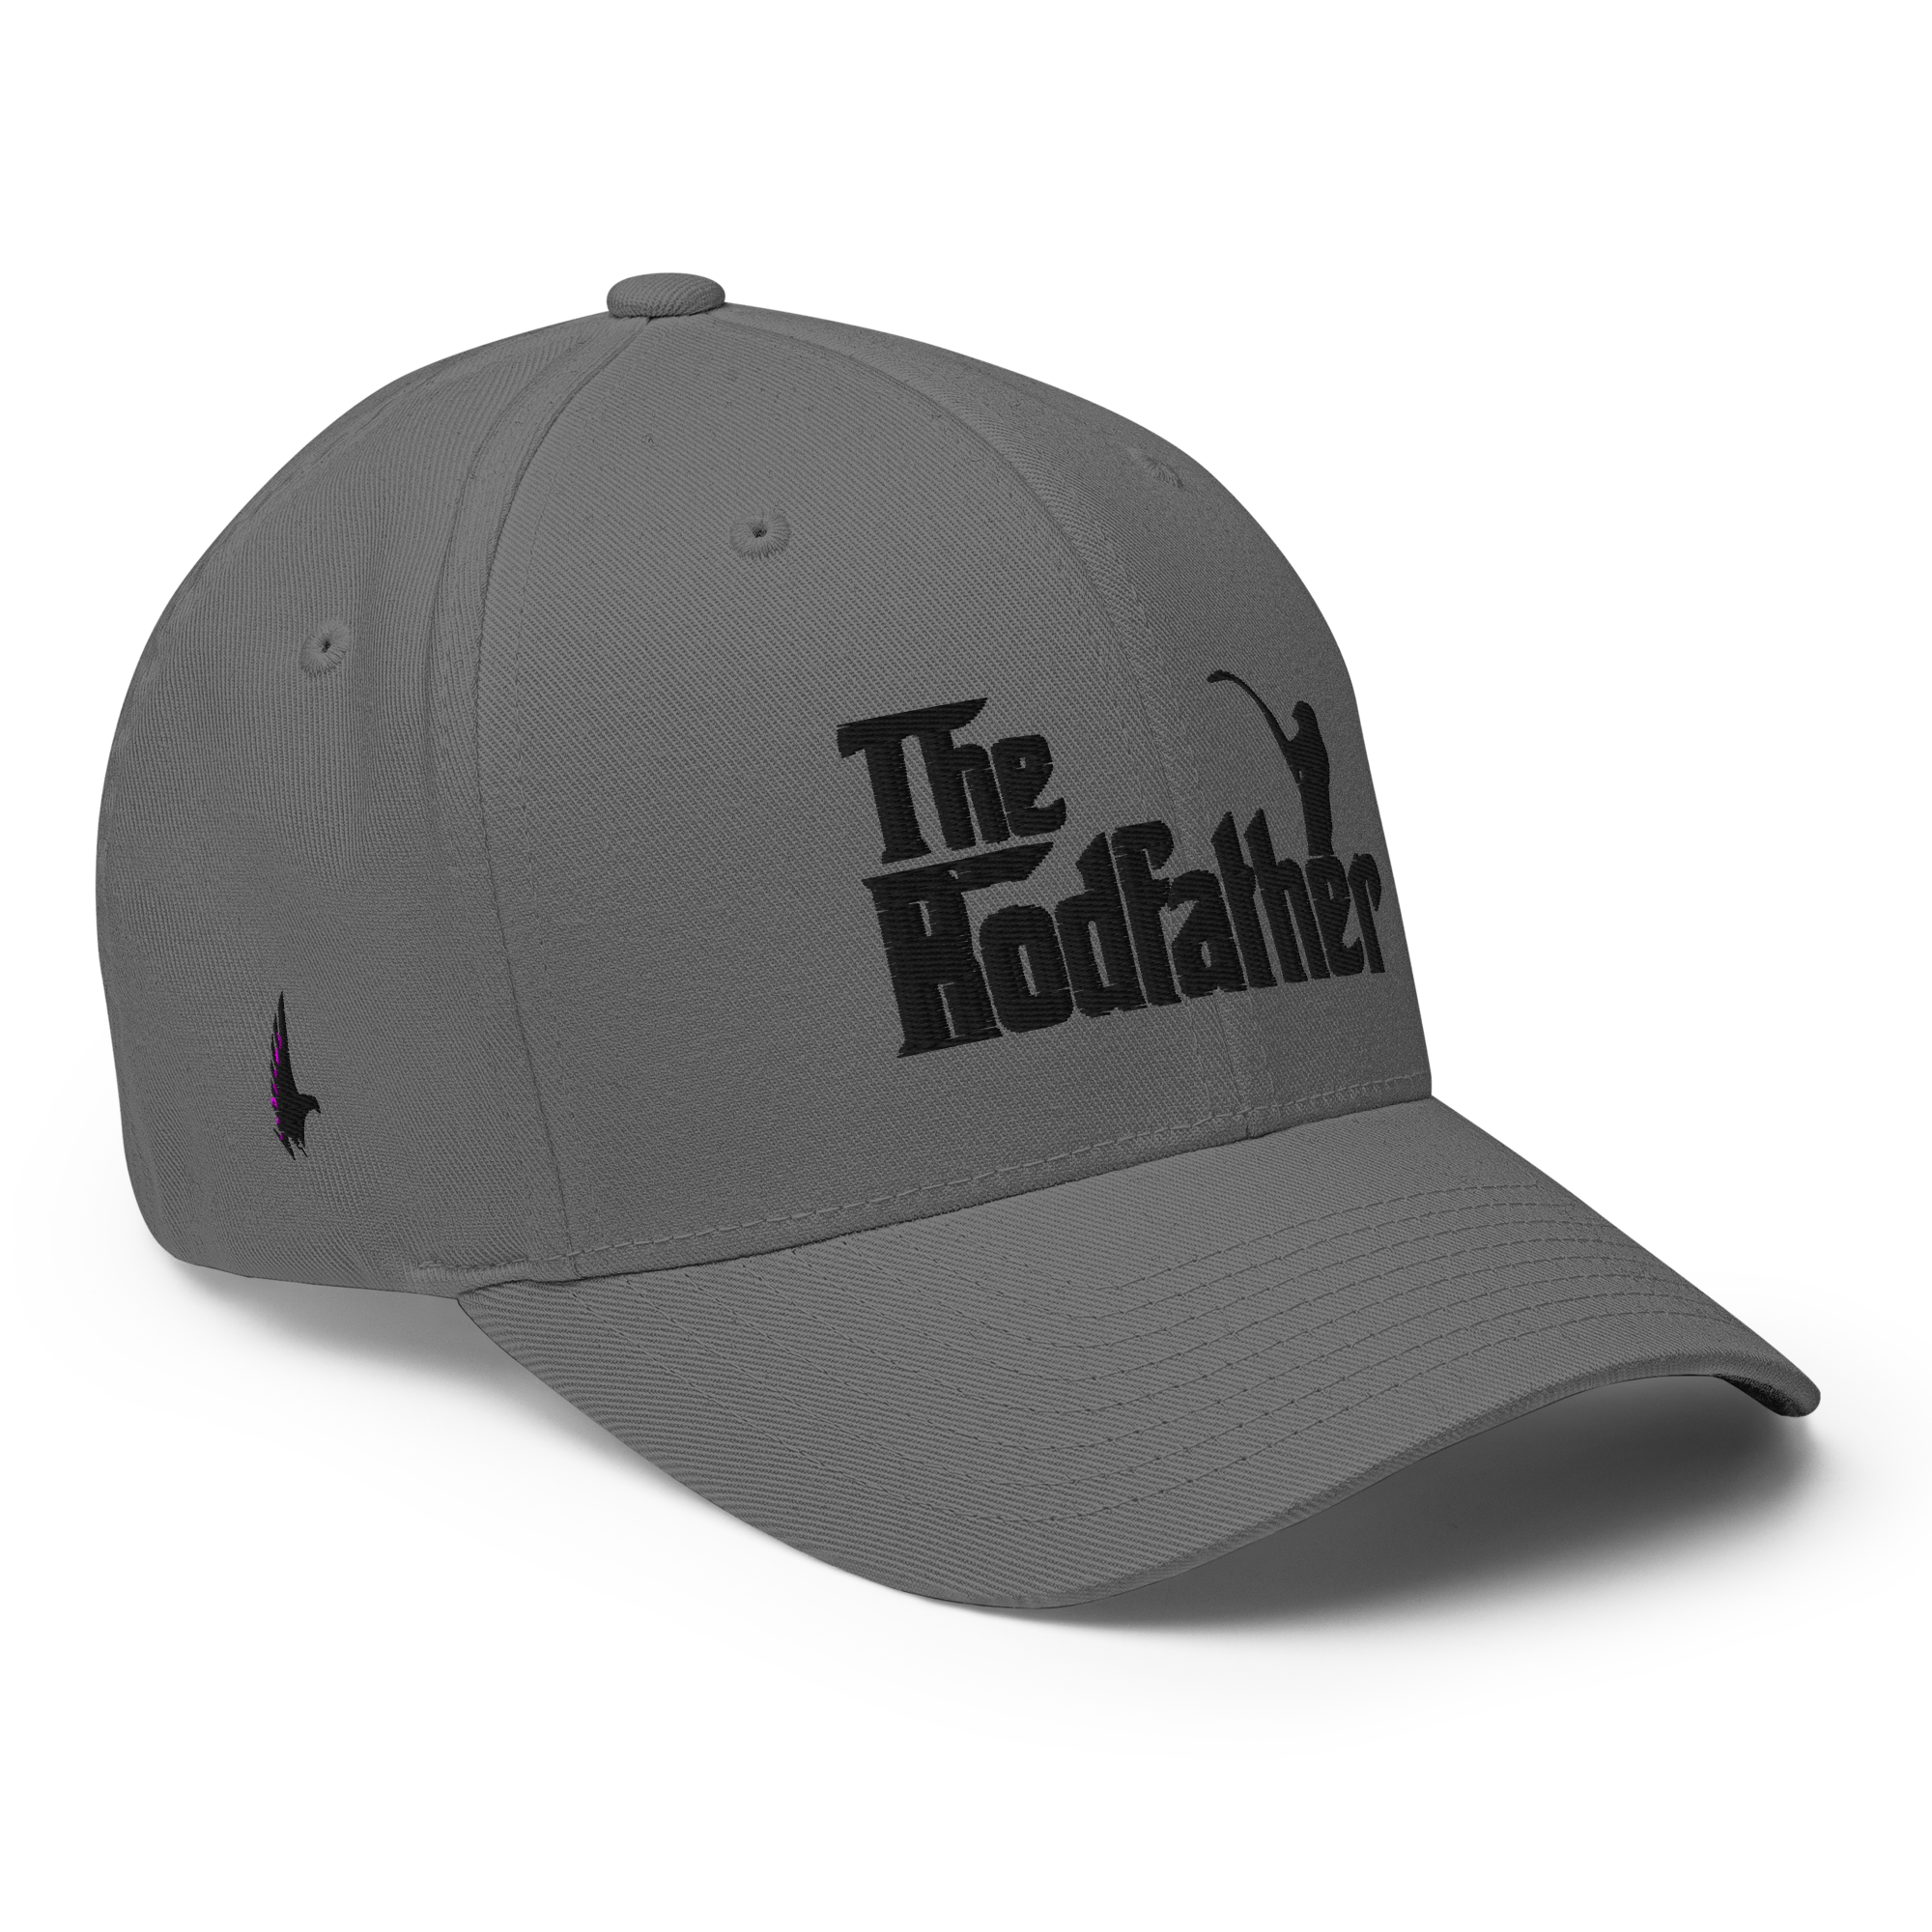 Rodfather Fitted Hat Grey Black - Loyalty Vibes